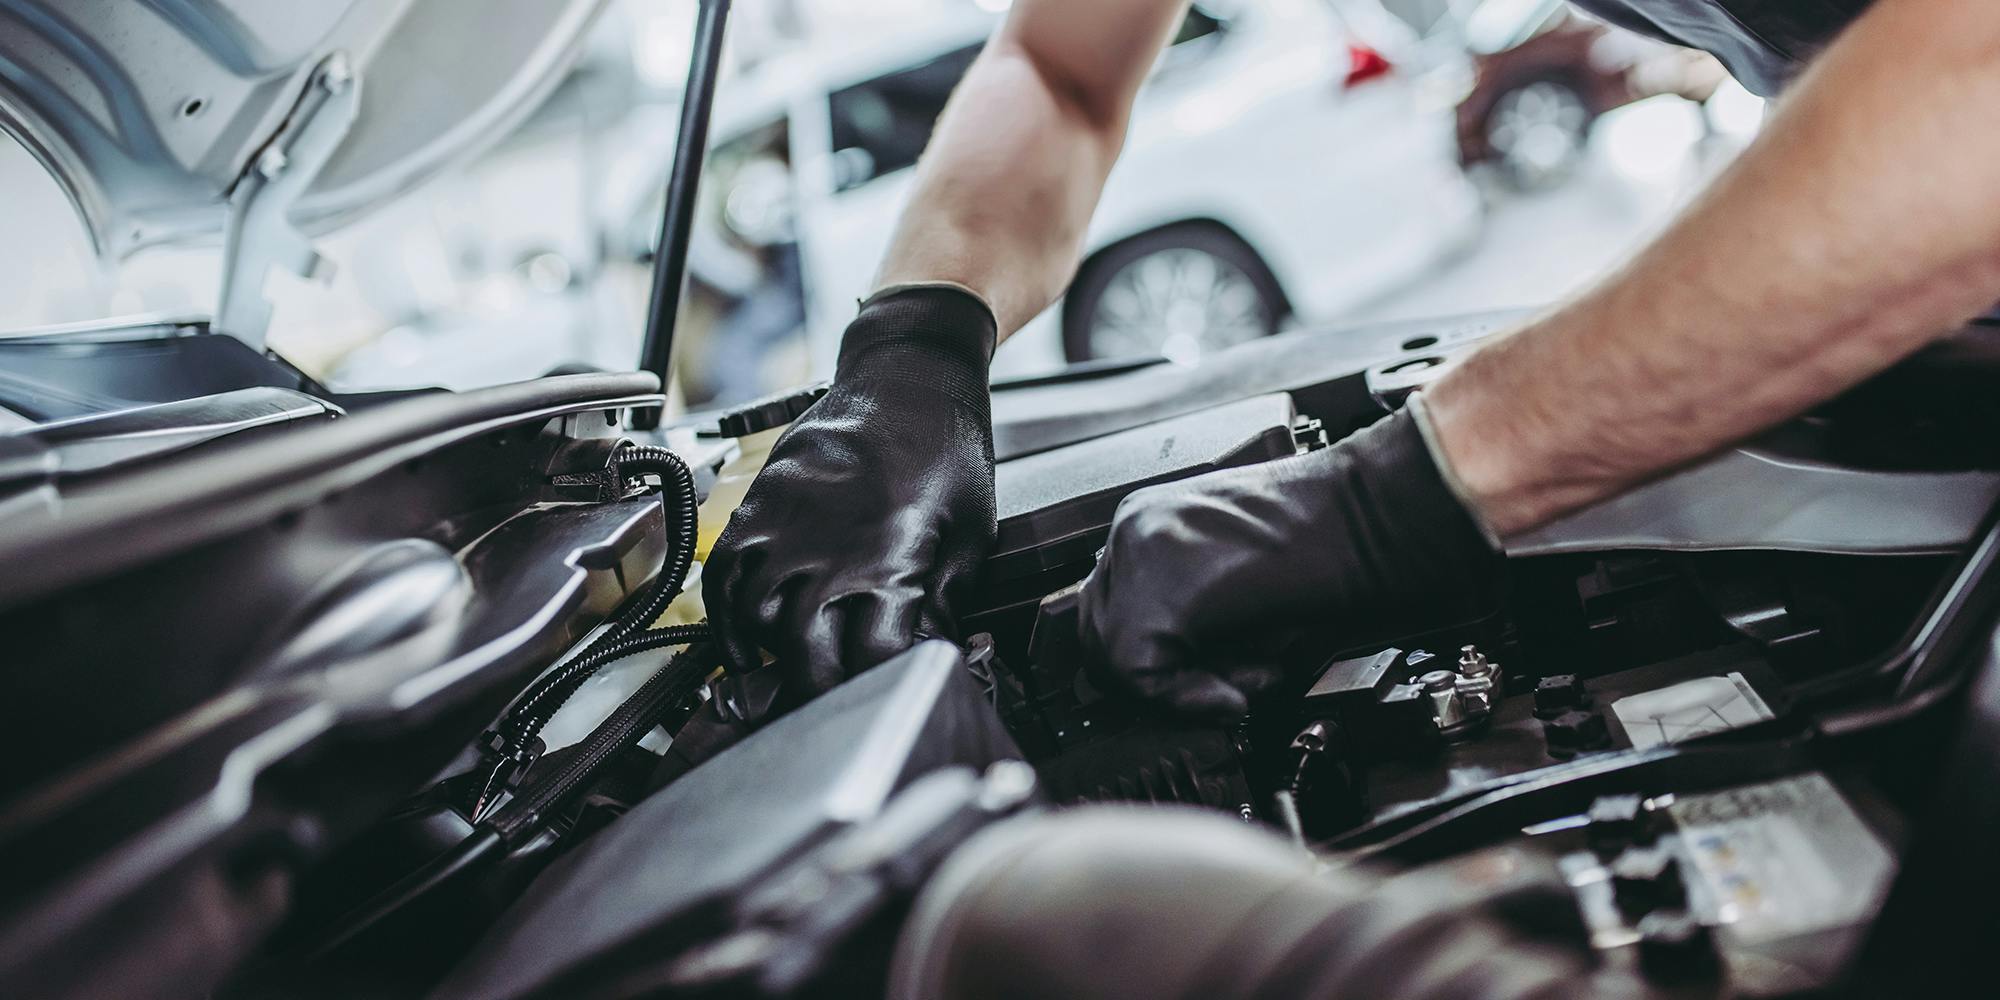 ‘Honey they charged you HOW MUCH?!’: 5 tips to avoid getting scammed at the mechanic